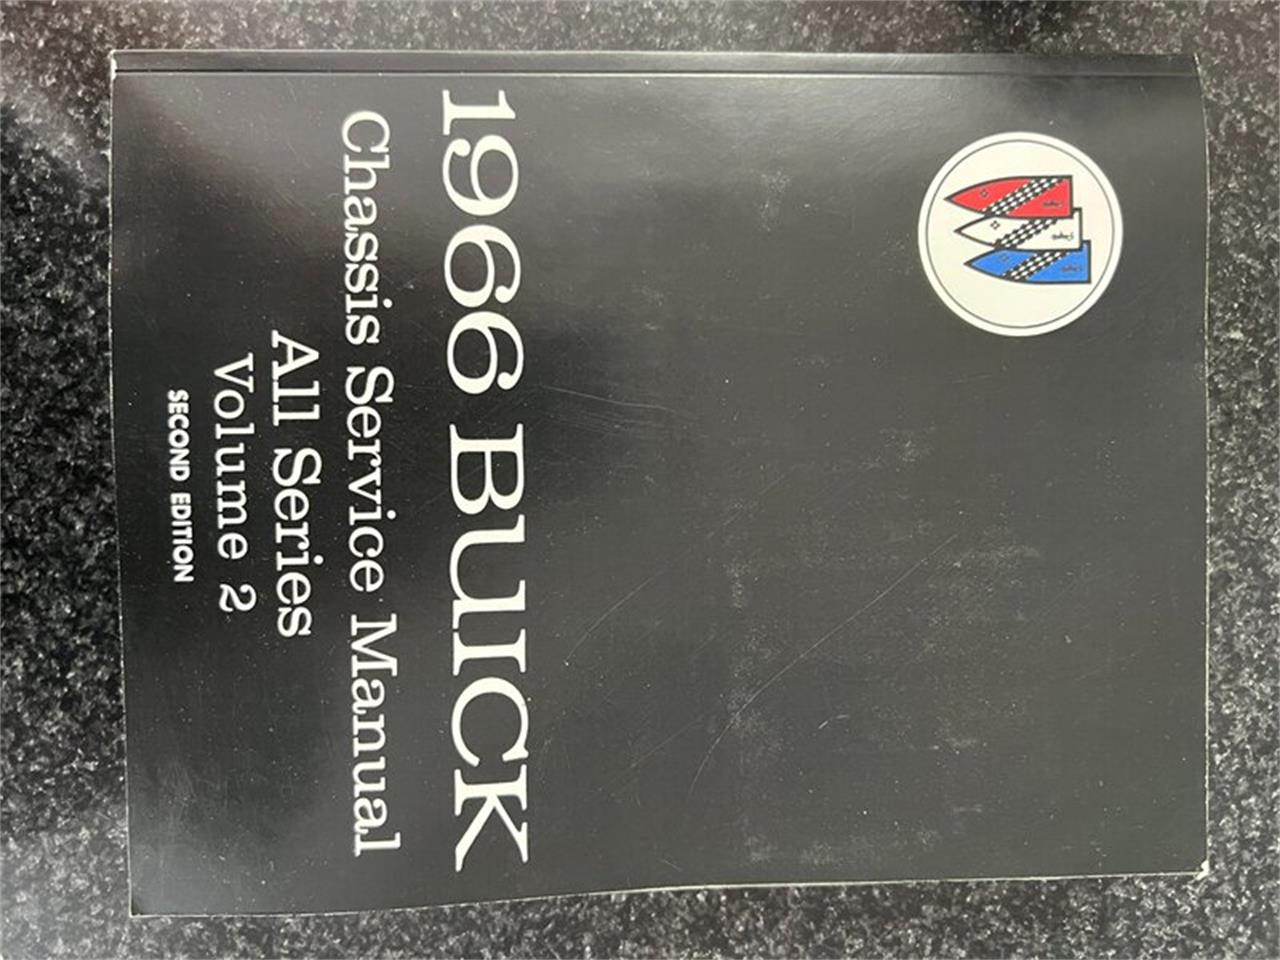 1966 BUICK Service Manual 2冊セット2冊セットです